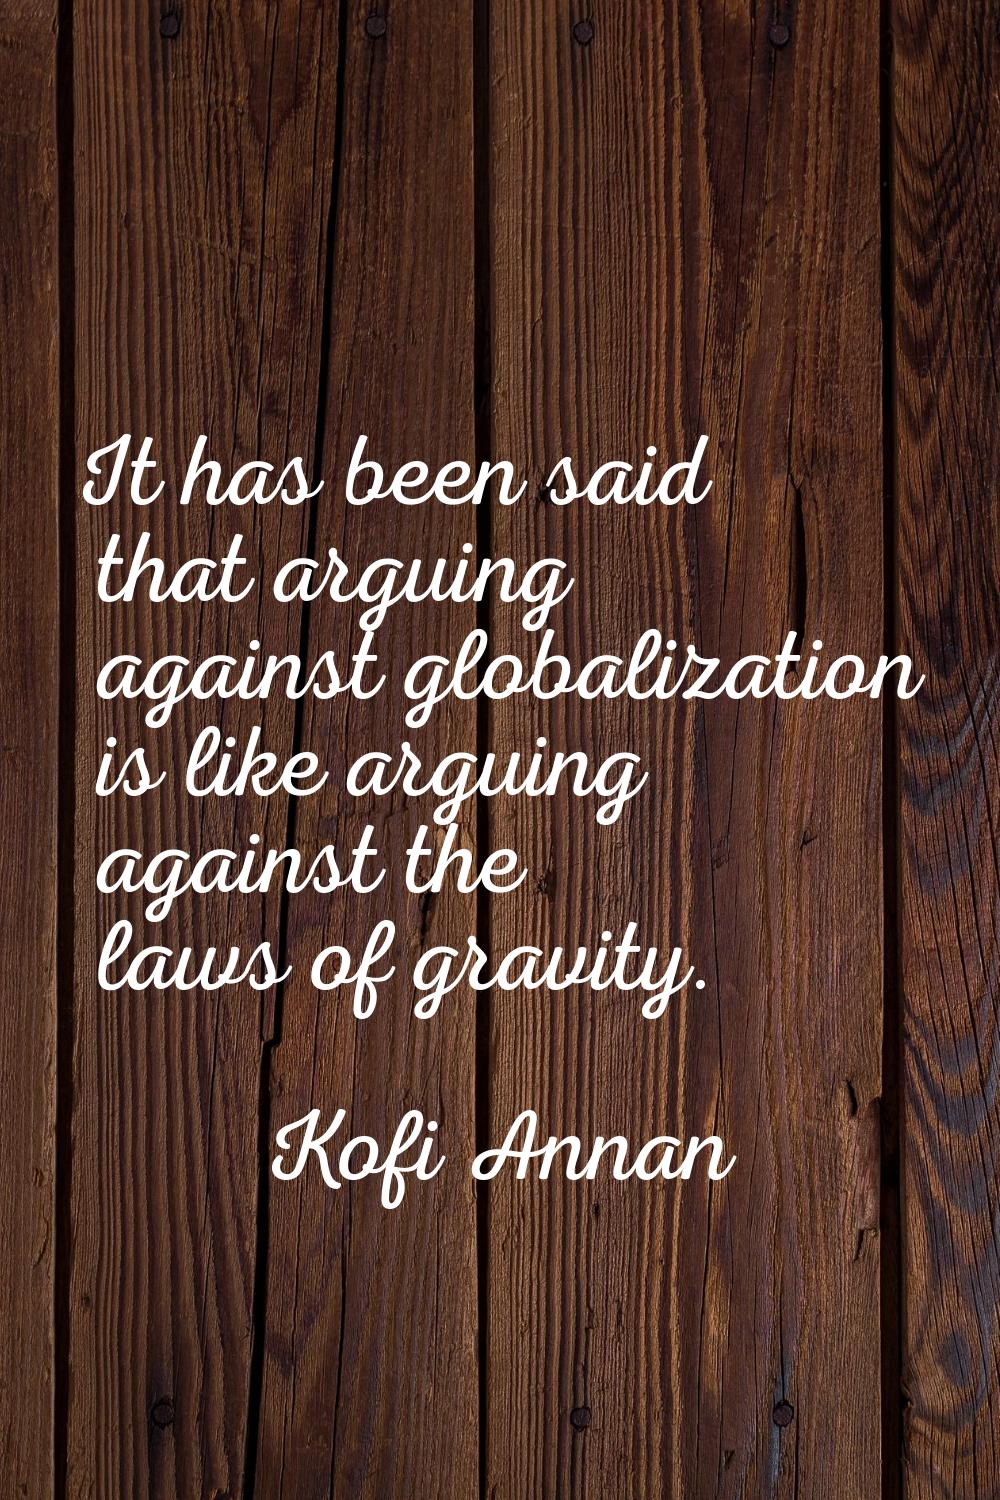 It has been said that arguing against globalization is like arguing against the laws of gravity.